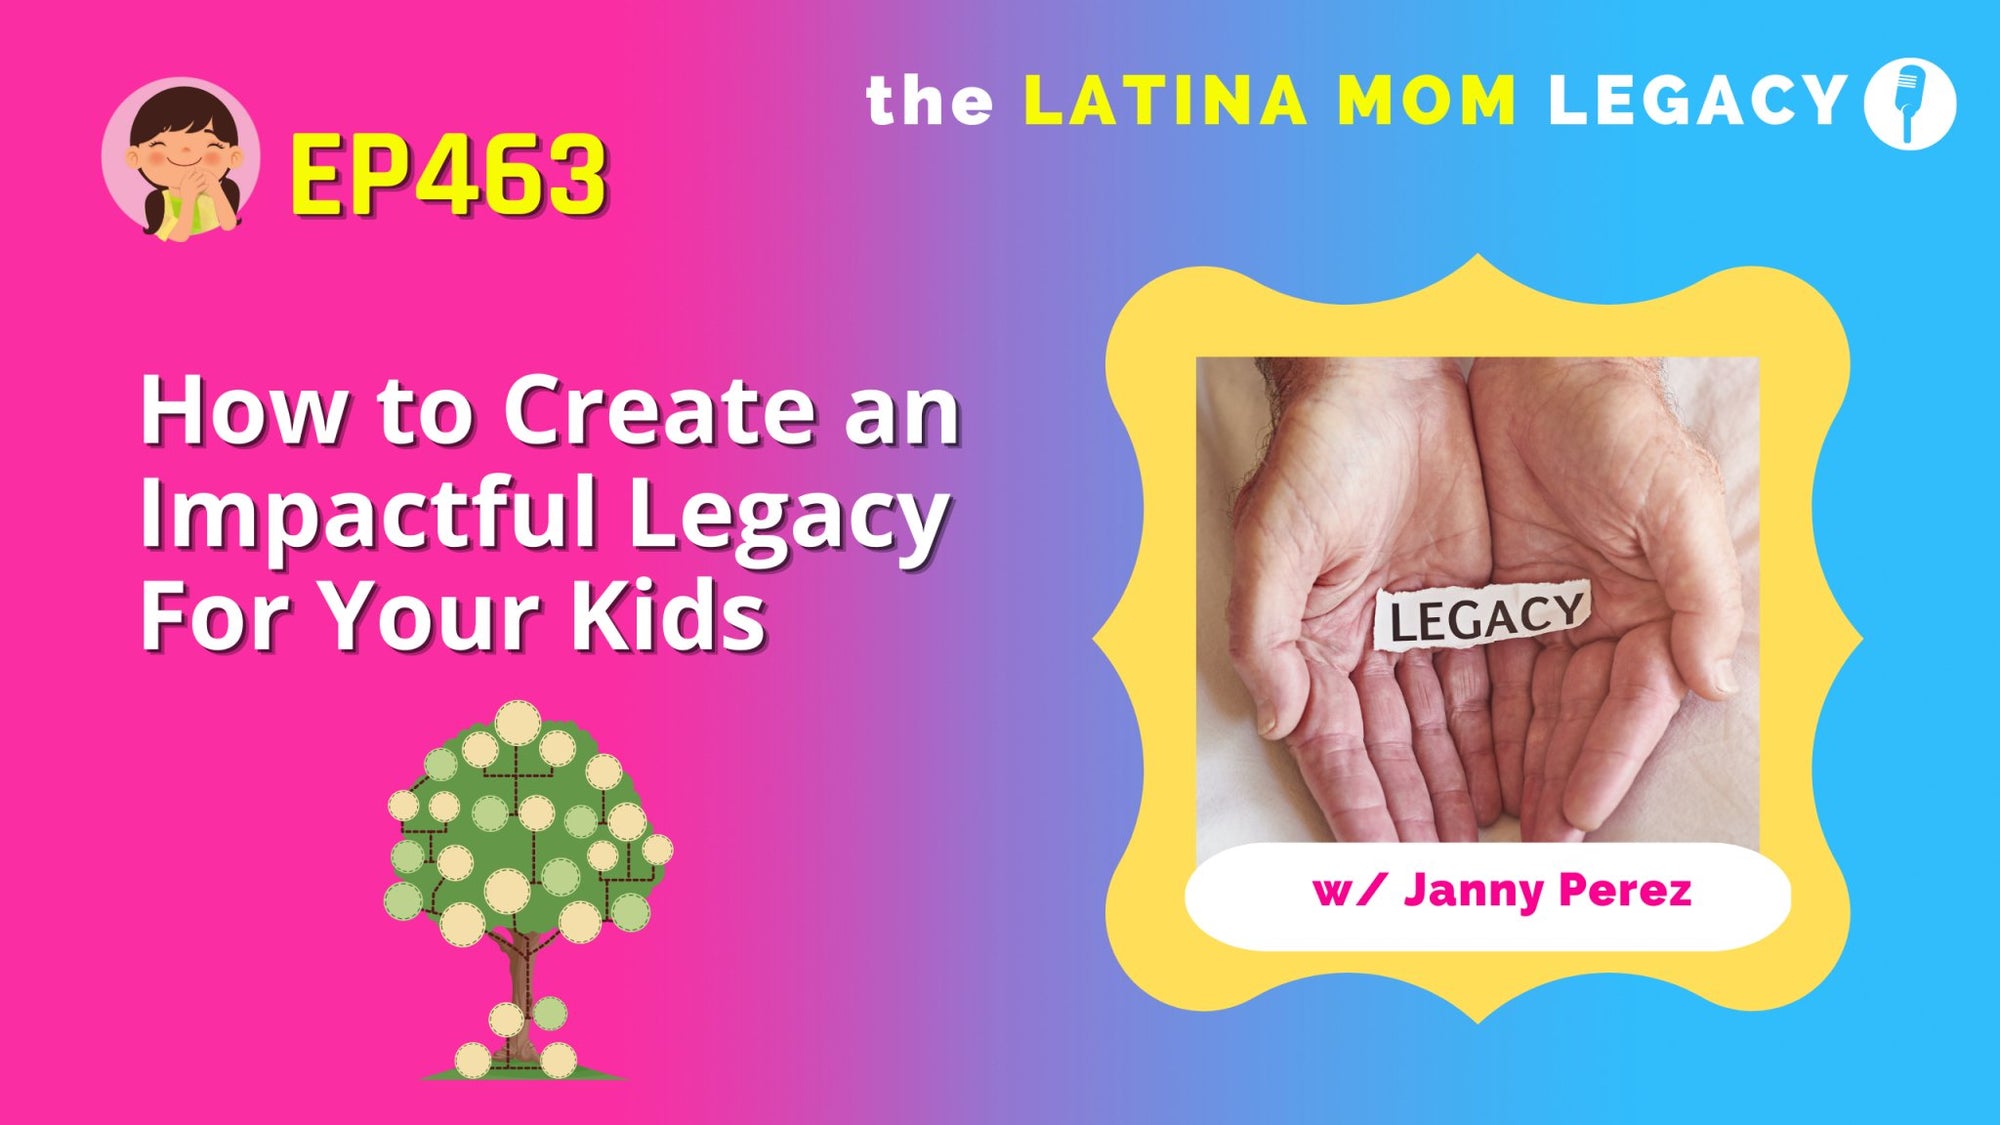 Ep 463 - How to Create an Impactful Legacy For Your Kids - Mi LegaSi